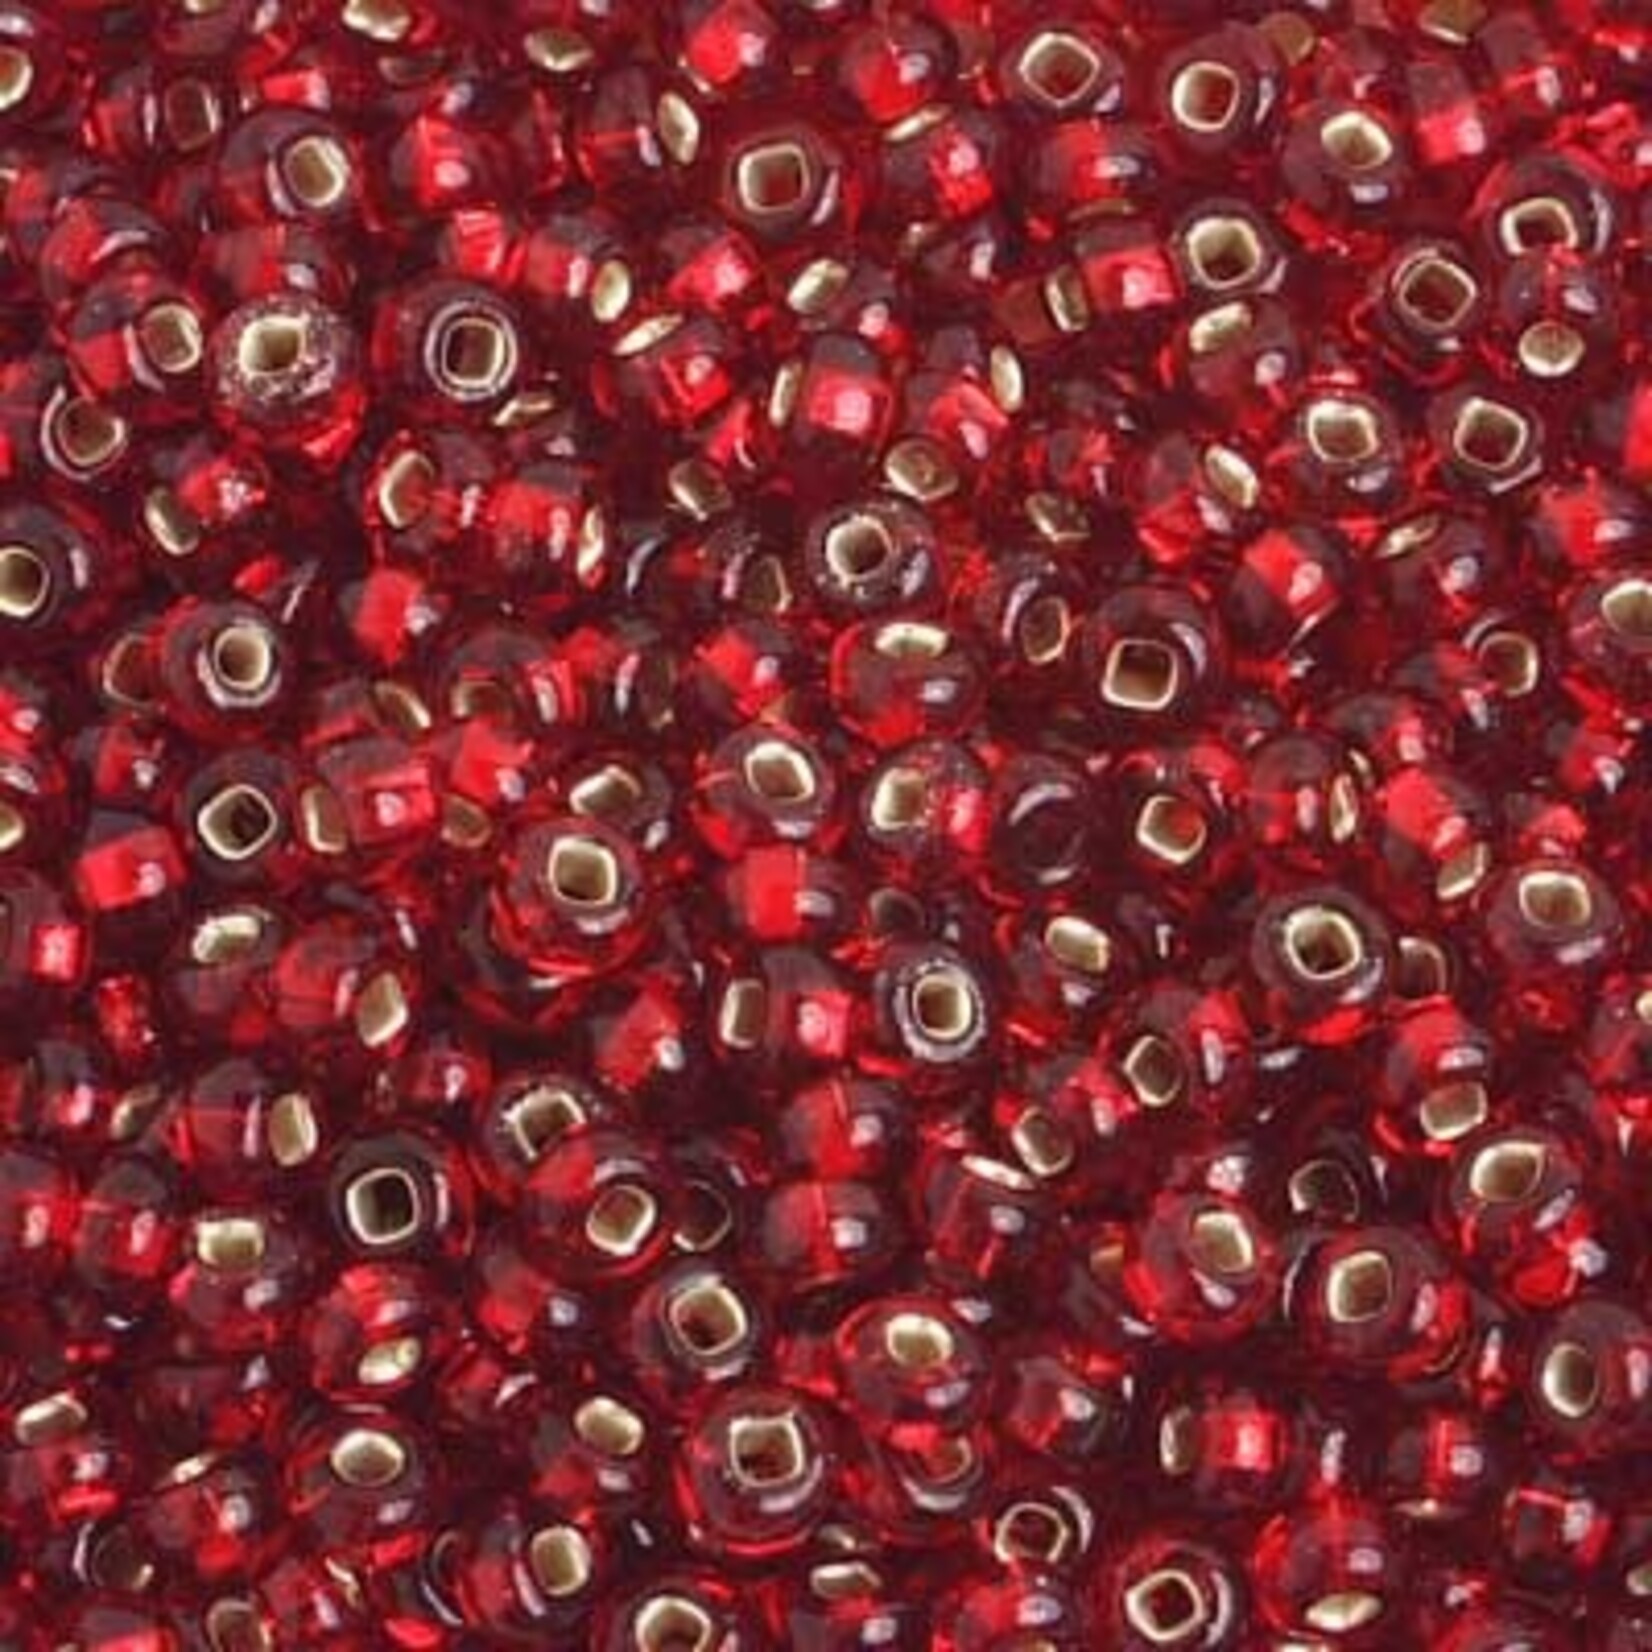 Ponybead (13 grams) Red 6/0 Silverlined